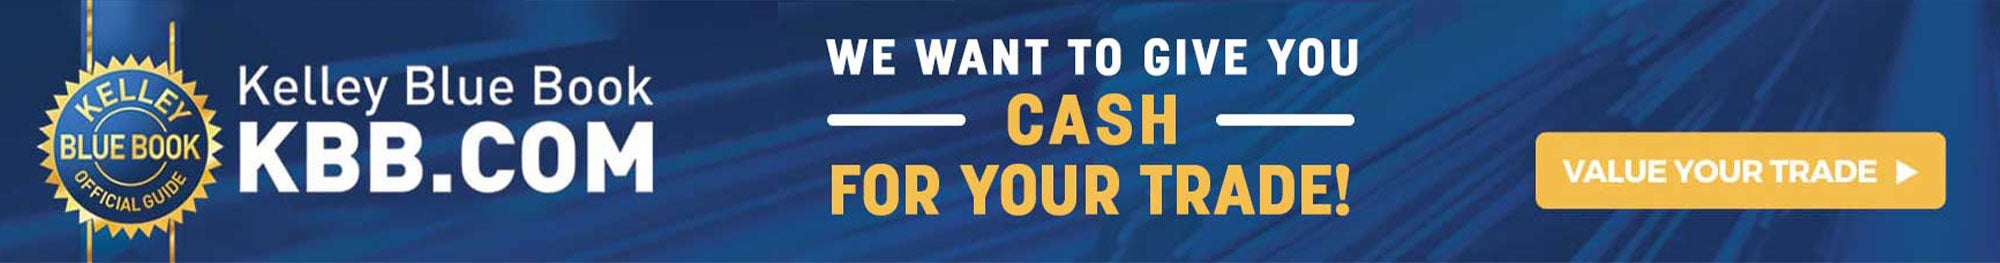 we want to give you cash for your trade banner